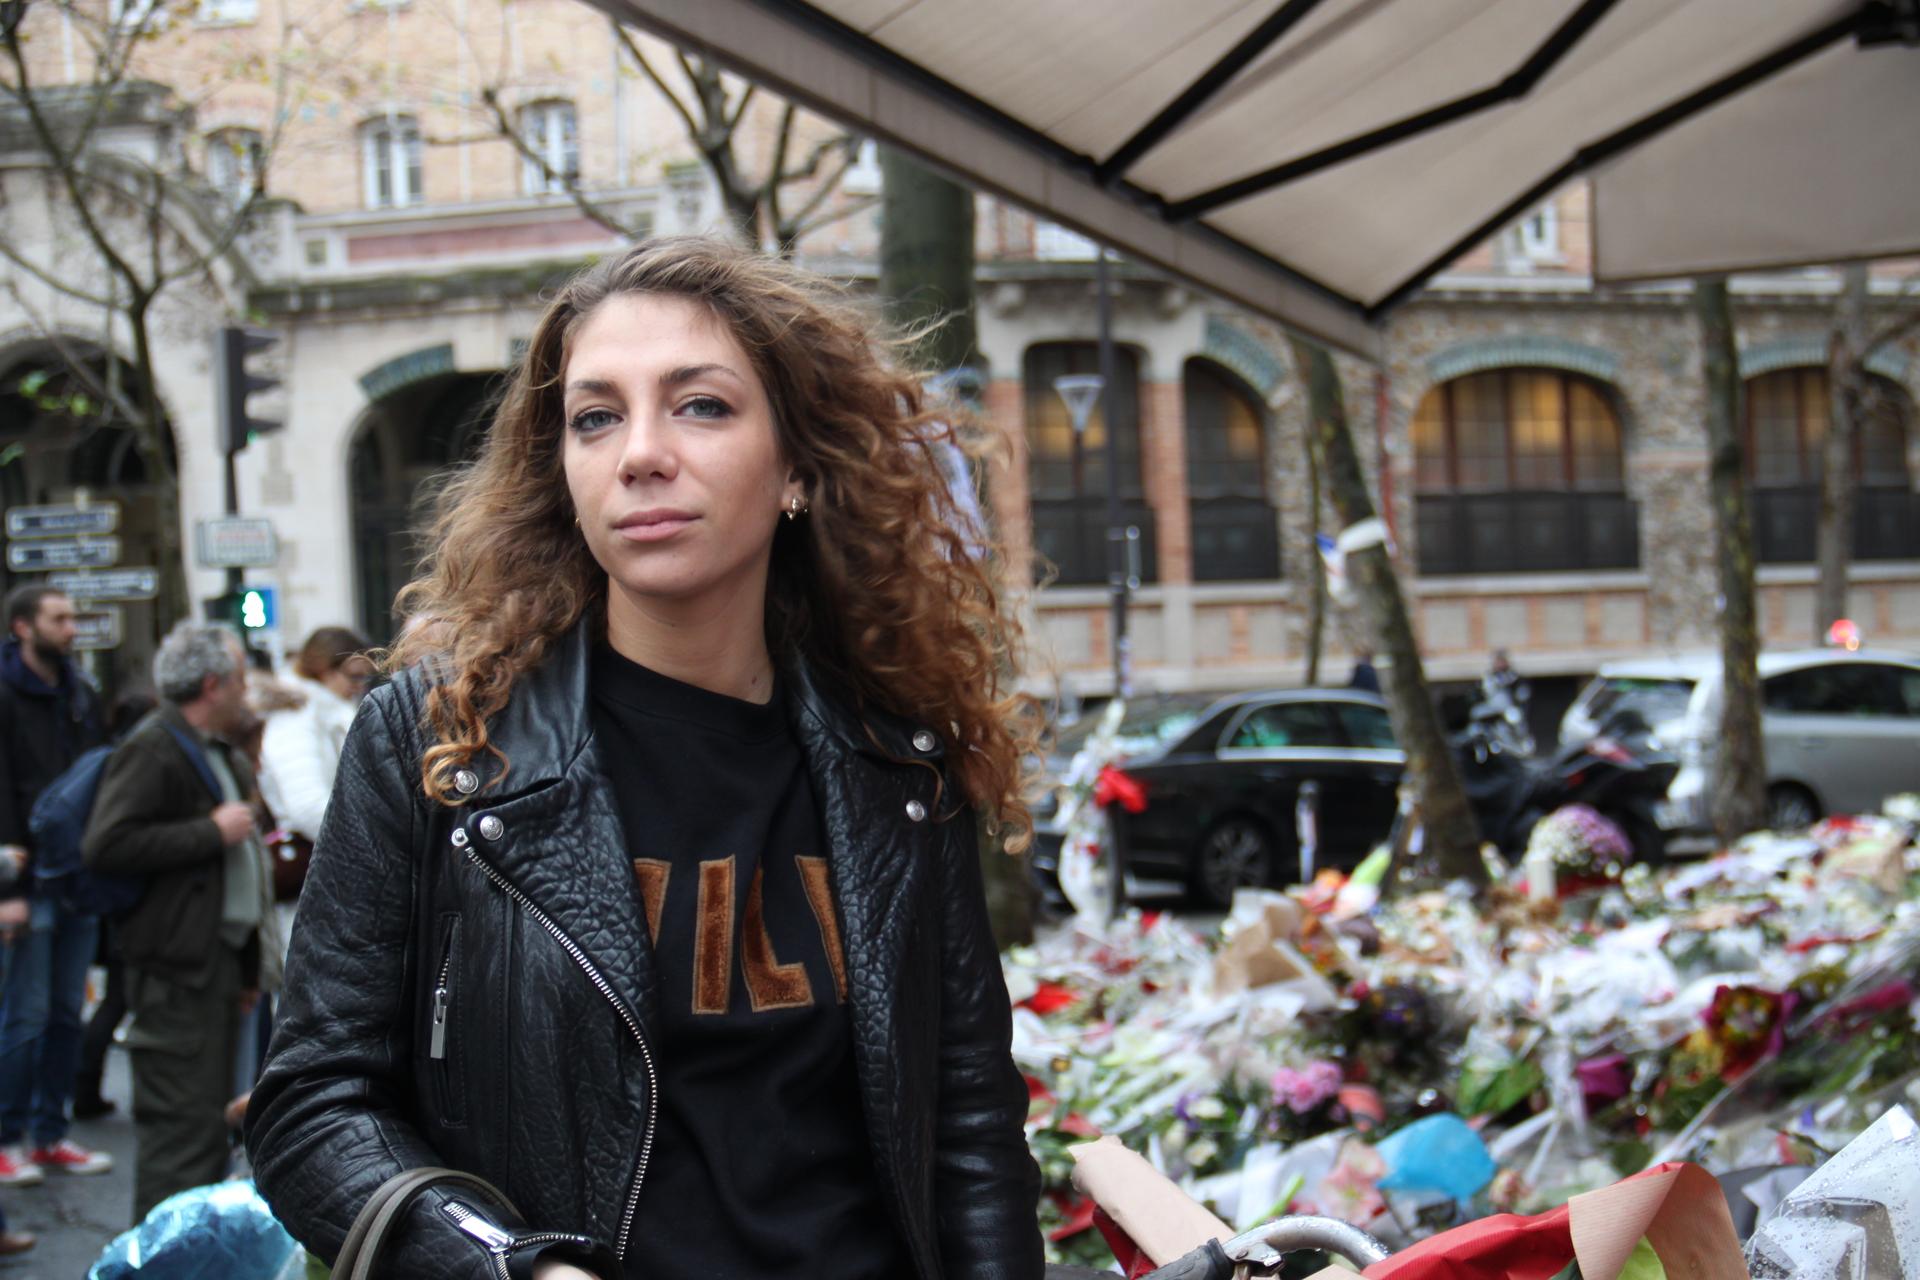 Morgane Bloncourt, 24, lives a few minutes walk away from a cafe that was attacked last Friday. She's now moving to Israel. "I don't feel safe in Paris. It's weird."